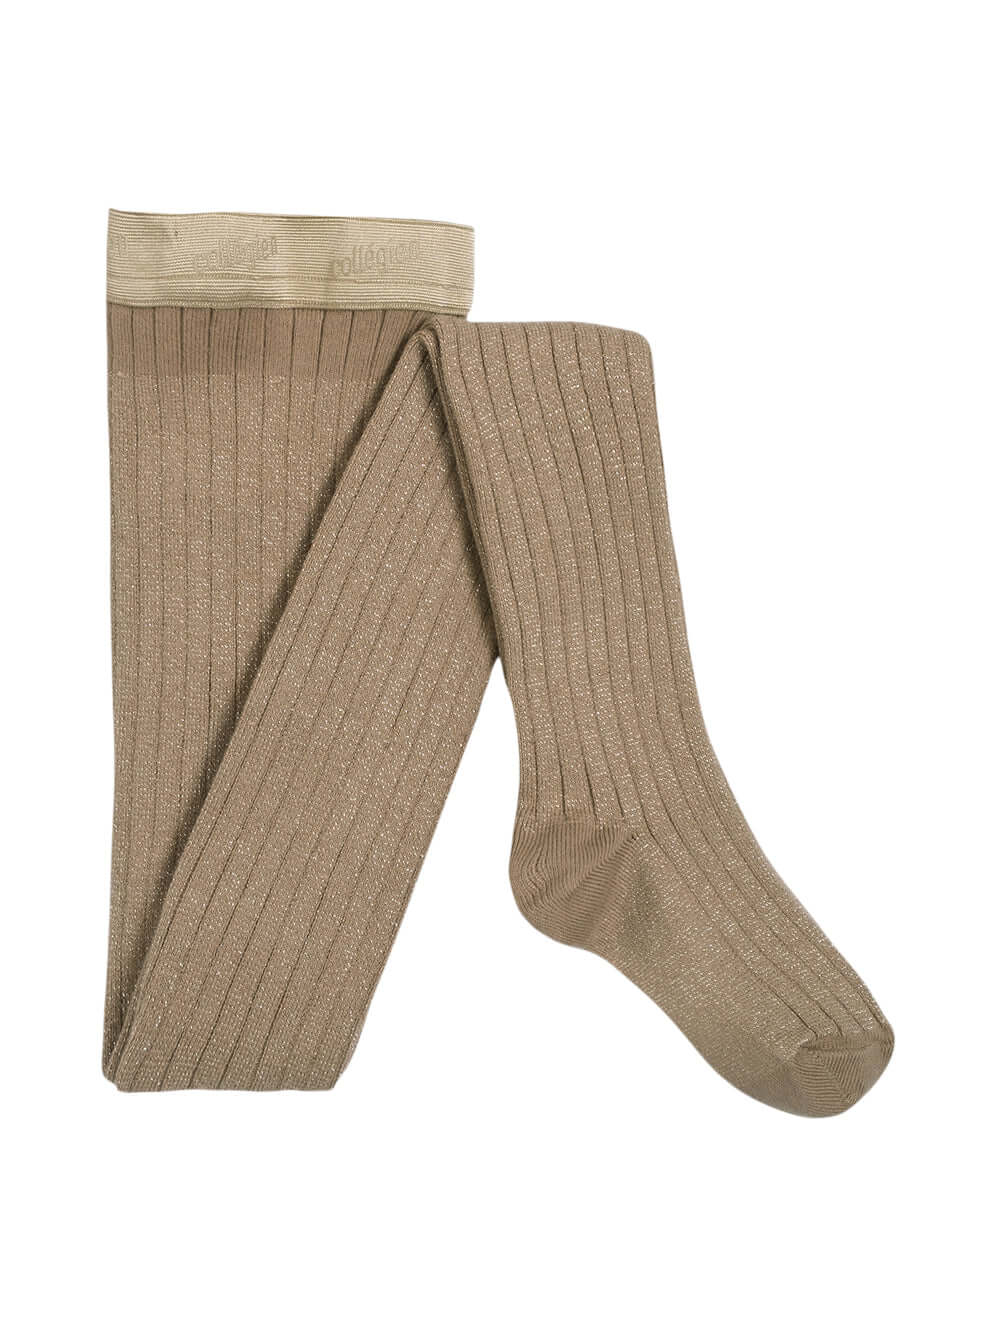 LIttle Stocking Co. Cable Knit Tights - Heather Ivory